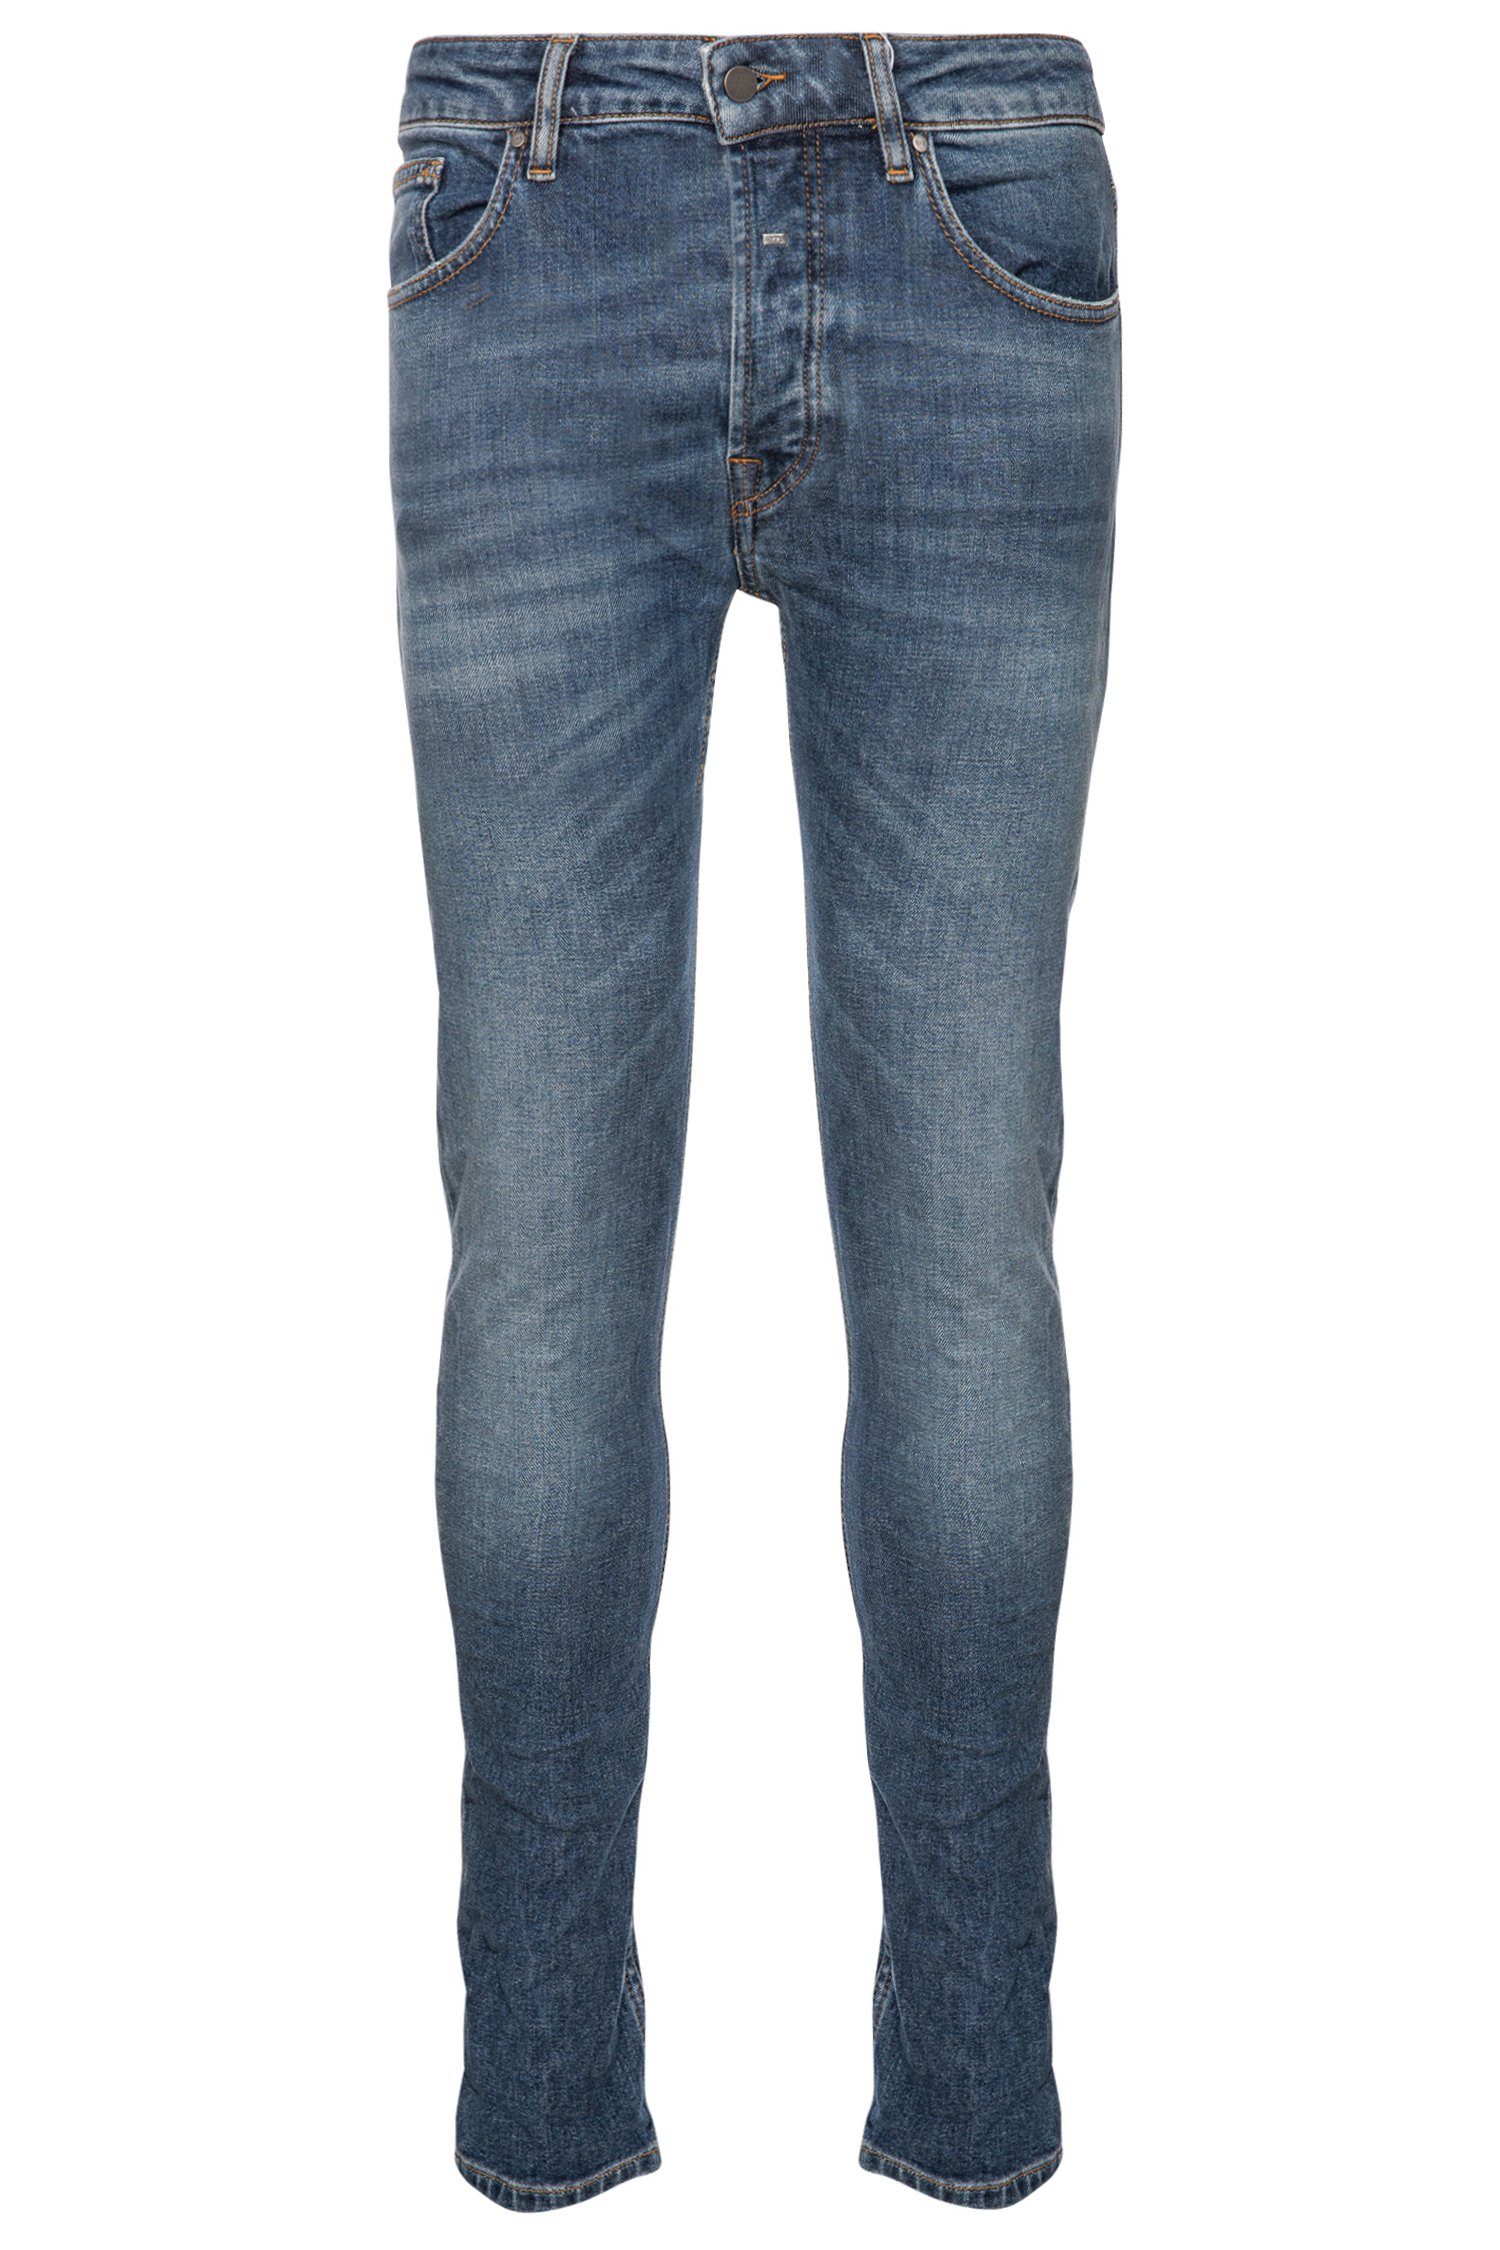 5-Pocket-Jeans Poets (1-tlg) Morten Society Young